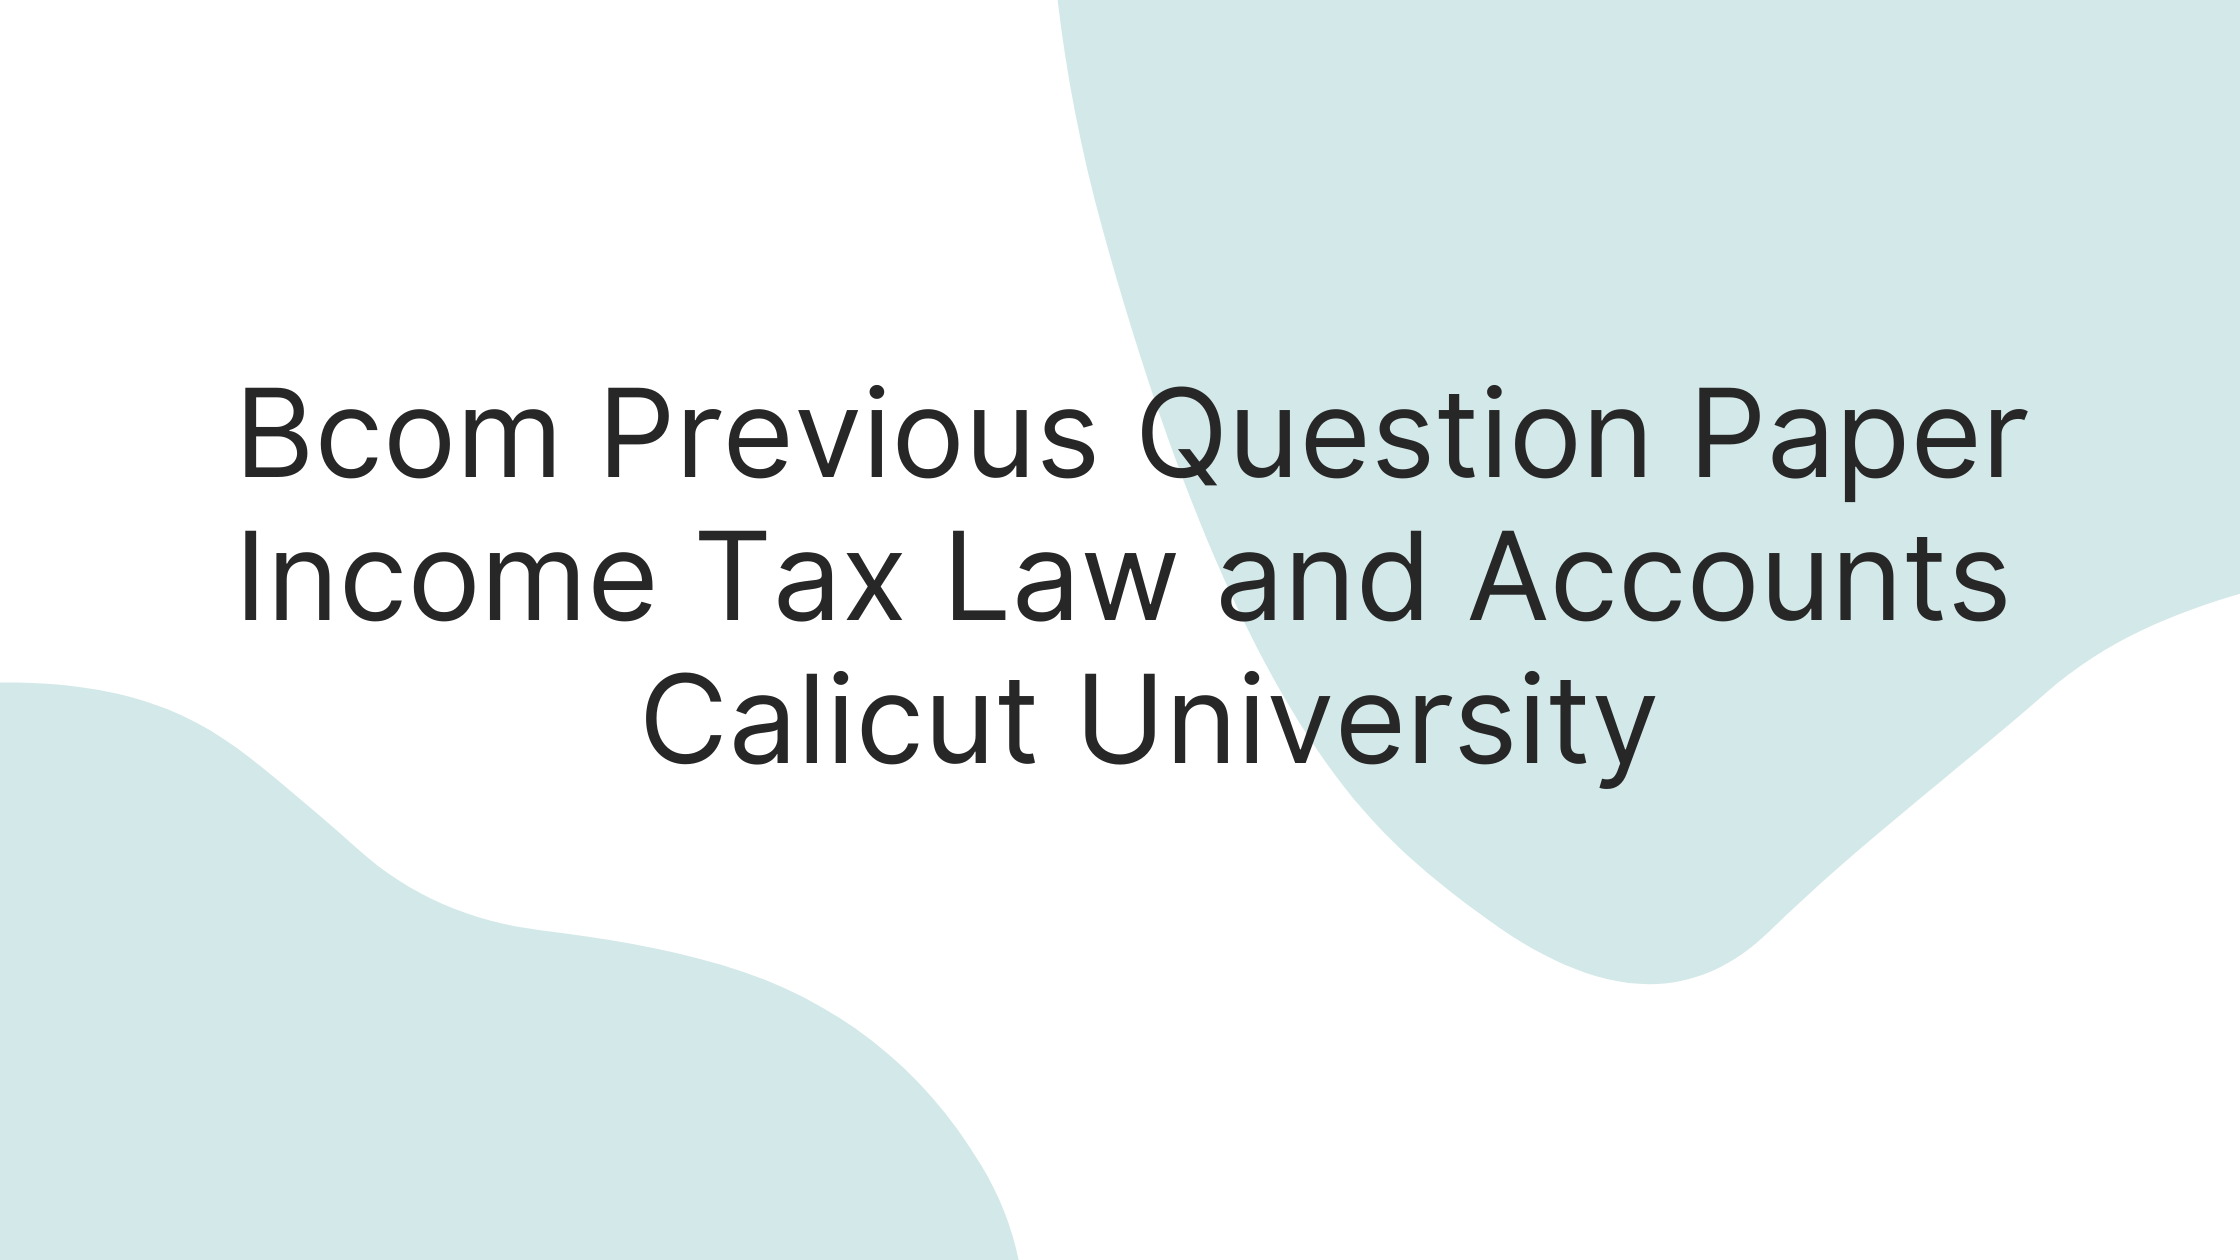 Bcom Previous Question Paper Income Tax Law and Accounts Calicut University